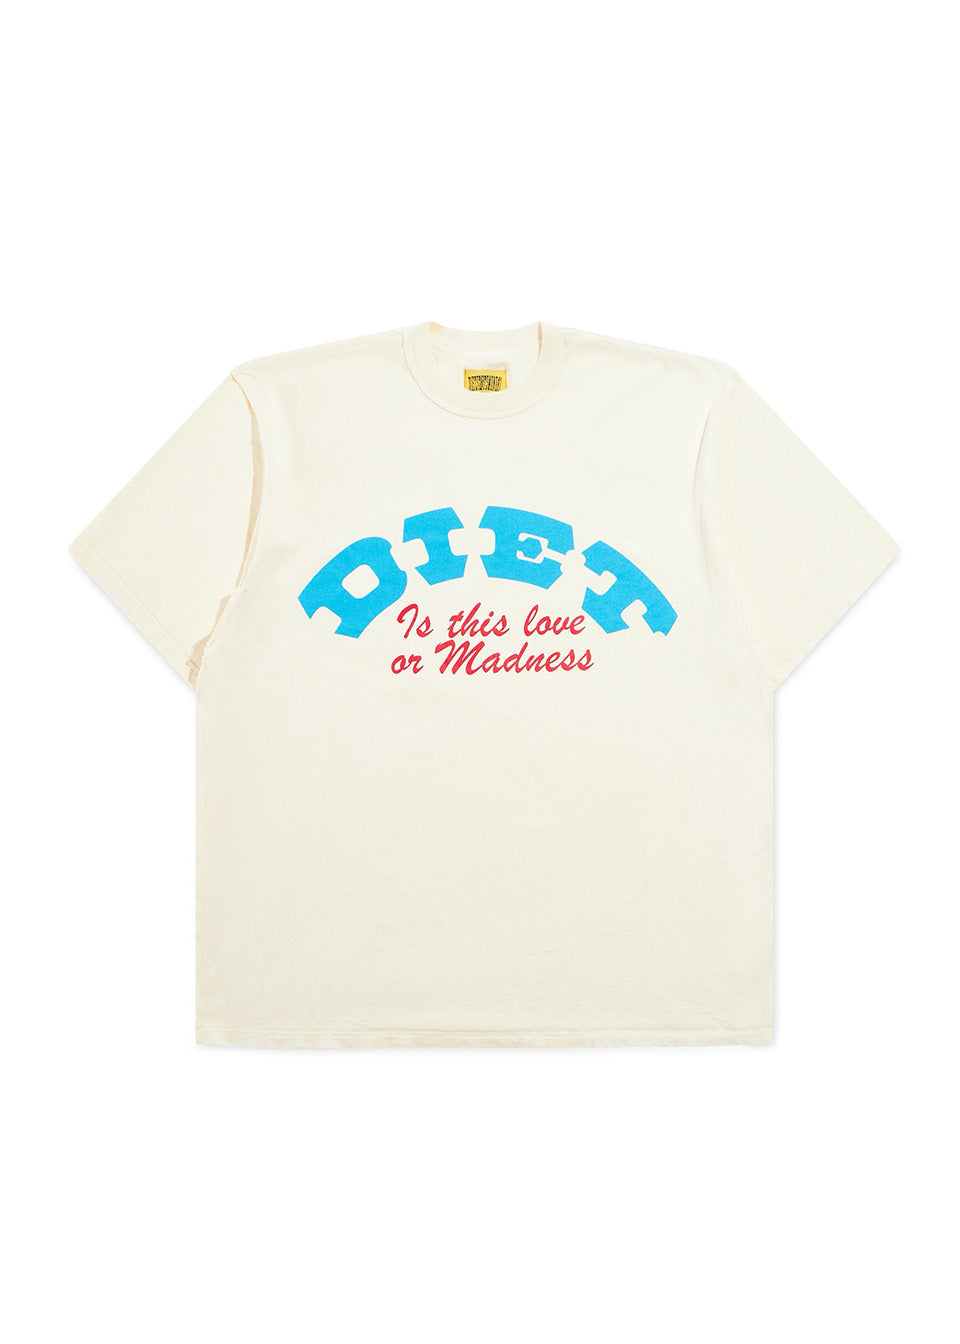 Madness Tee - Antique White